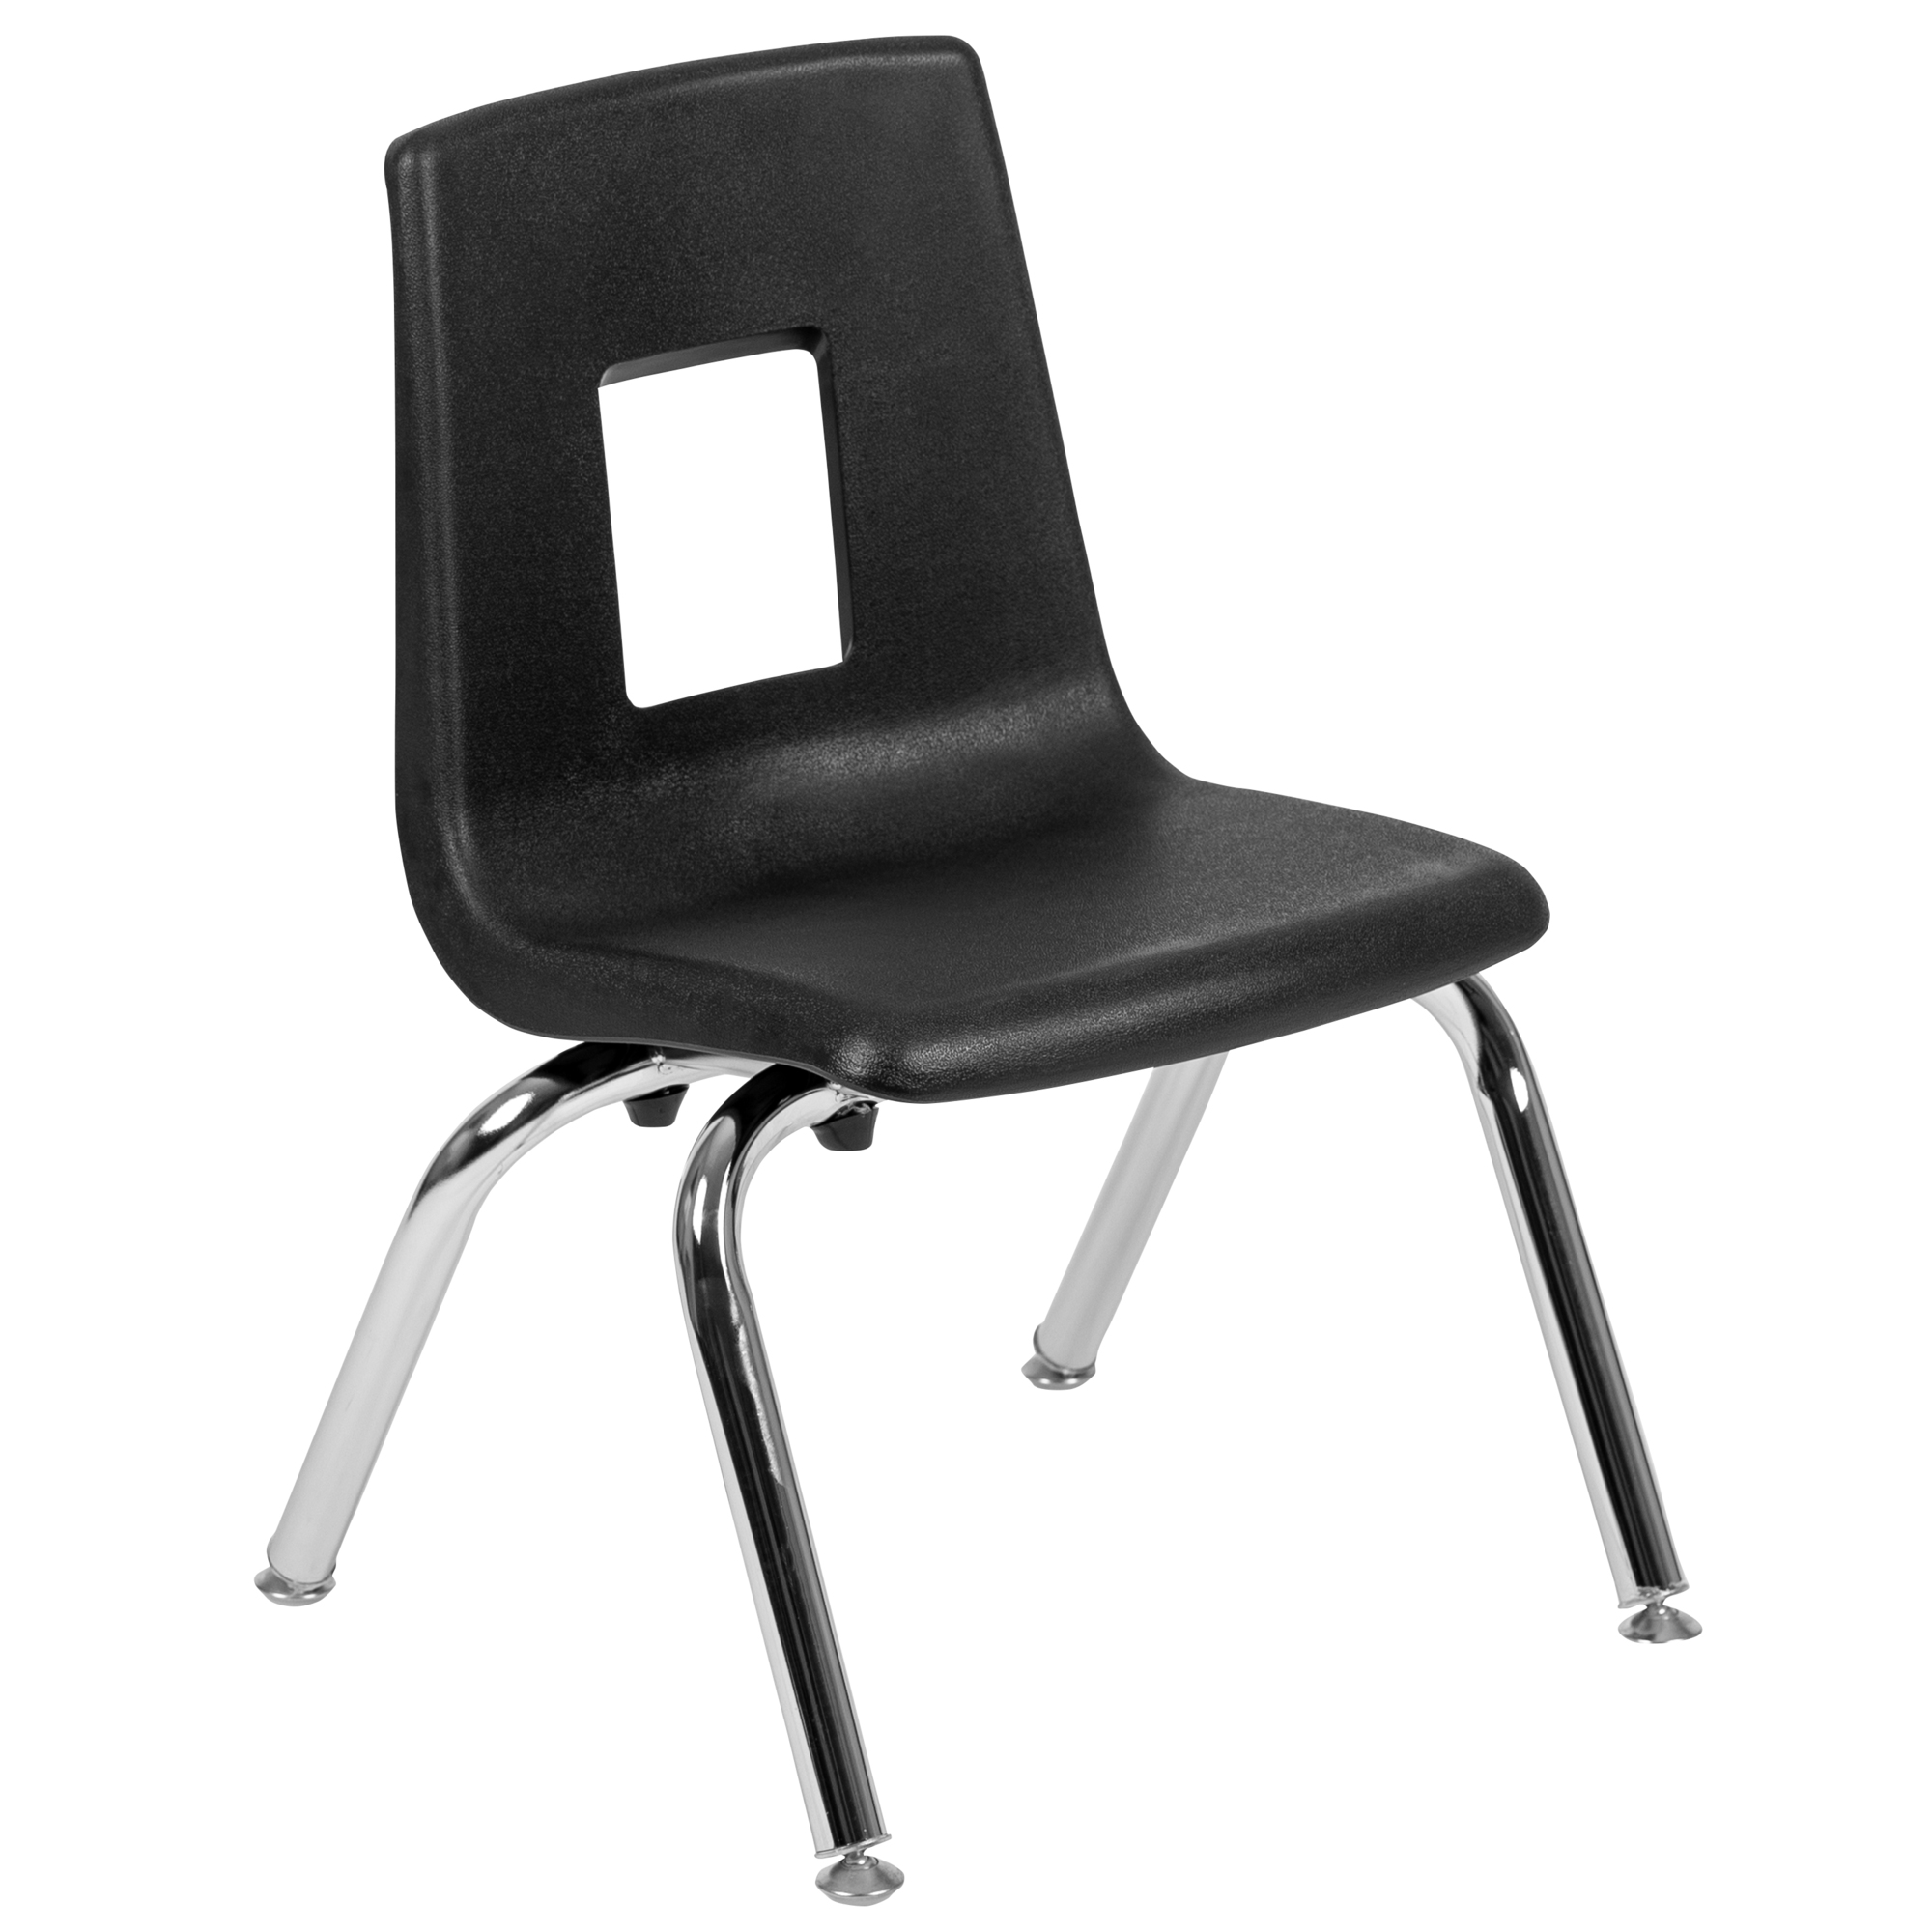 Flash Furniture, Black Student Stack Chair 12Inch - Classroom Chair, Primary Color Black, Included (qty.) 1, Model ADVSSC12BLK